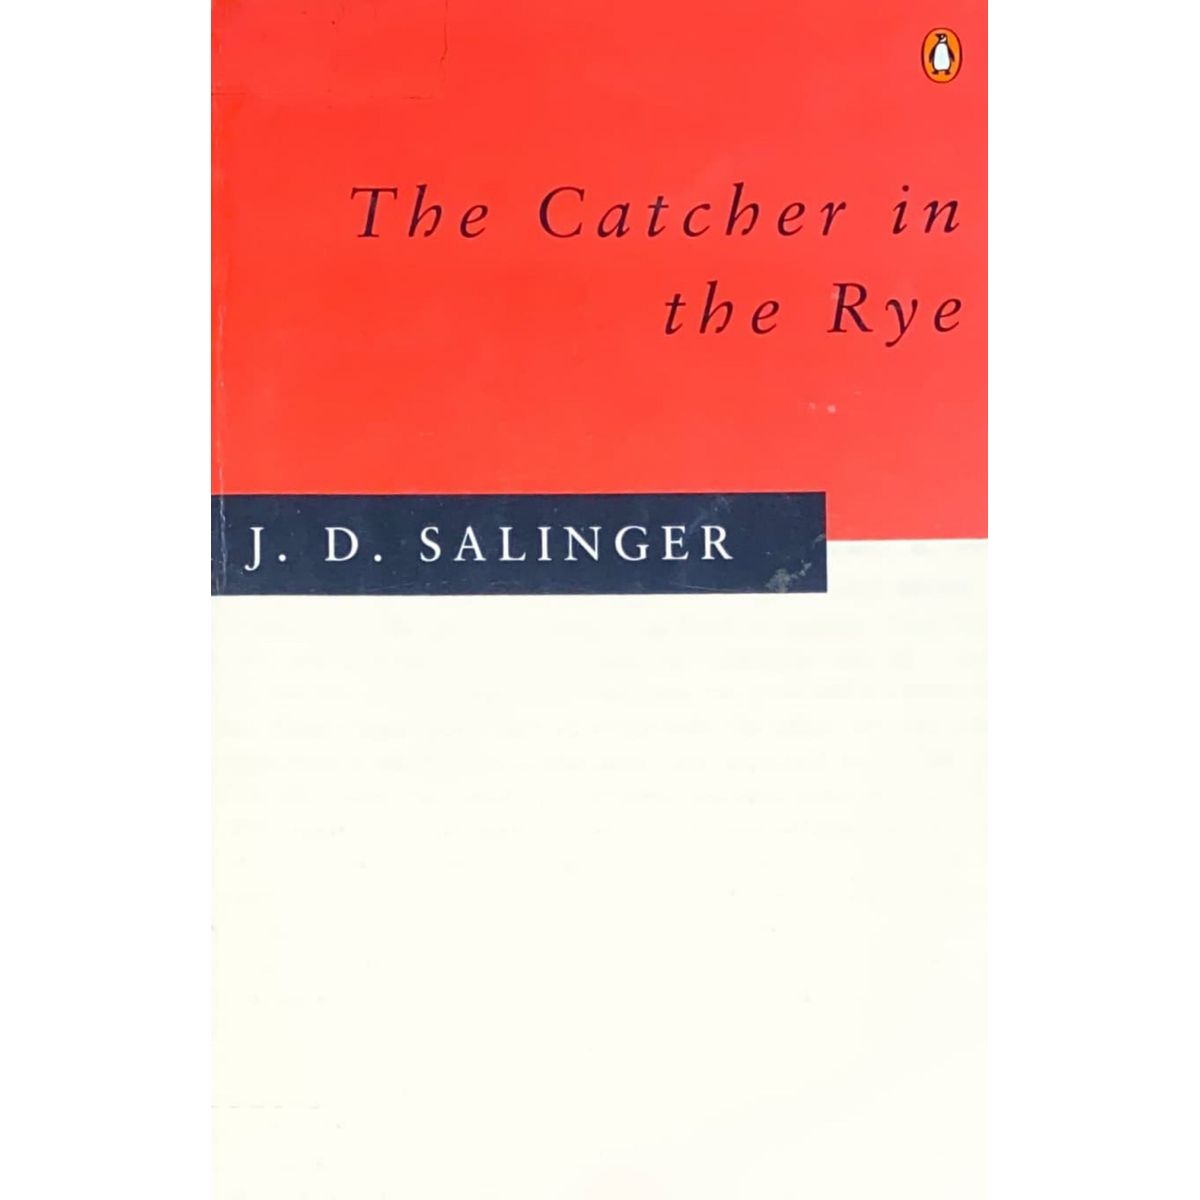 ISBN: 9780140237504 / 014023750X - The Catcher In The Rye by J.D. Salinger [1994]